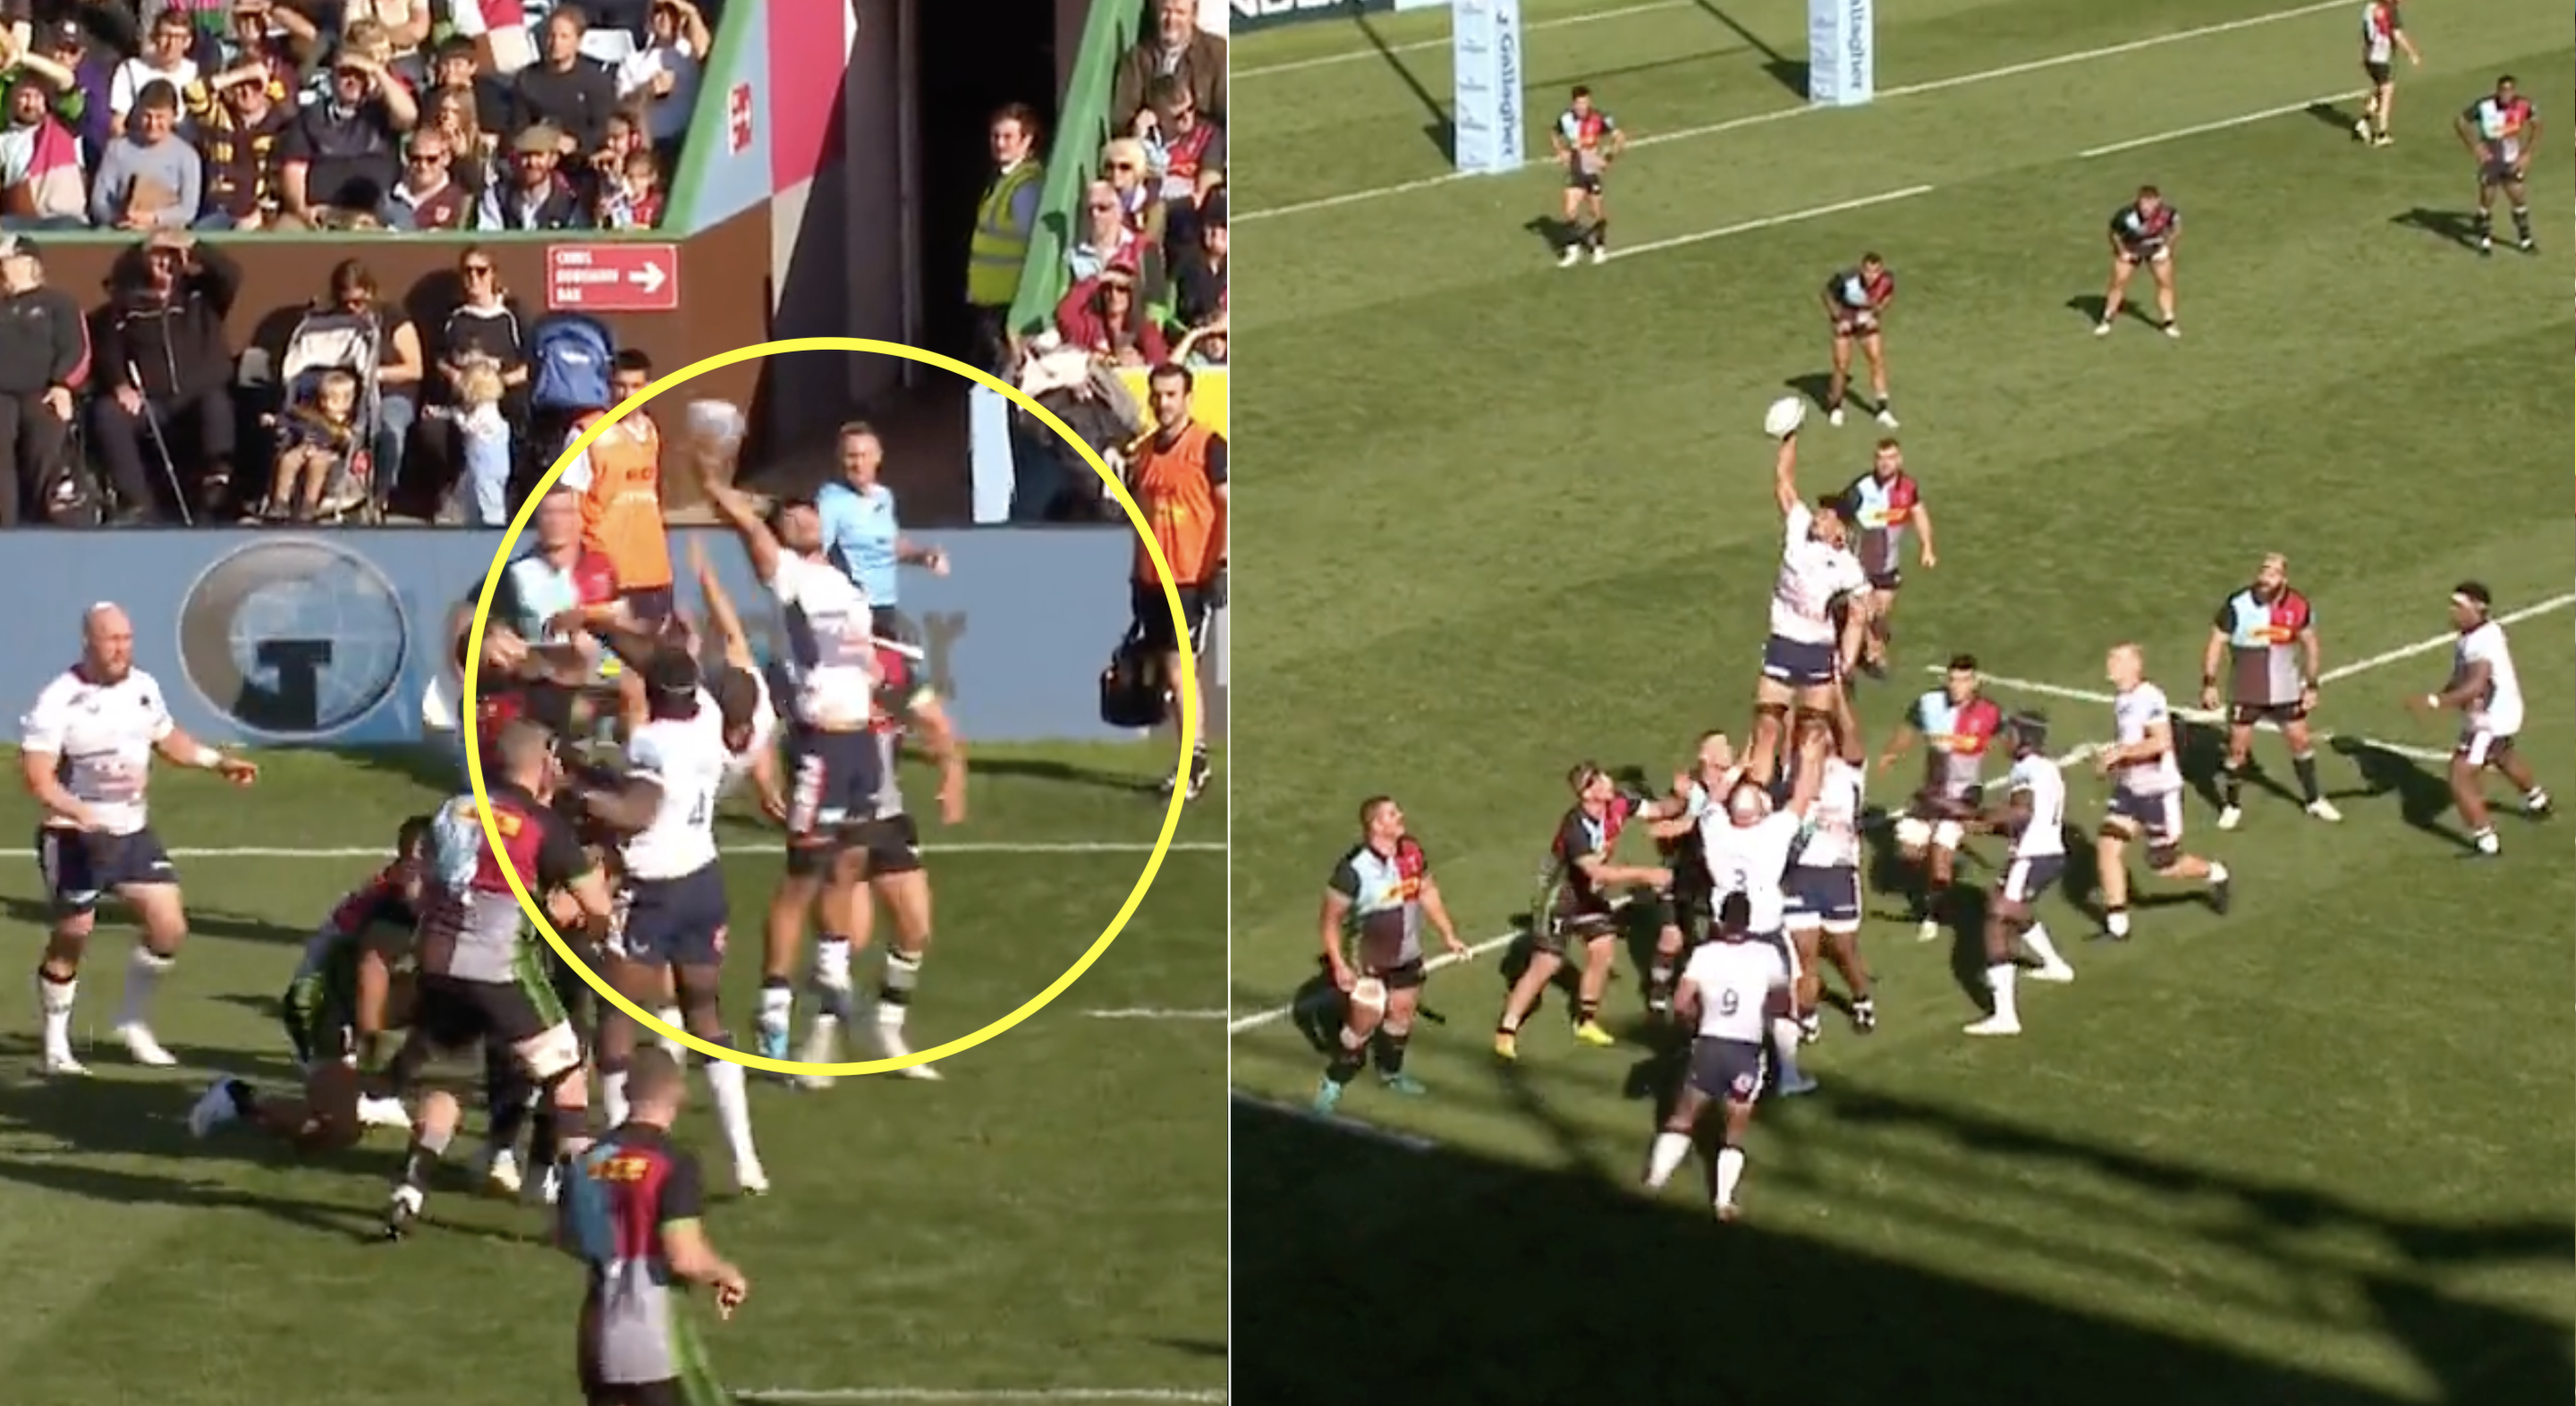 Saracens' 115kg flanker might just have the best hands in the Premiership